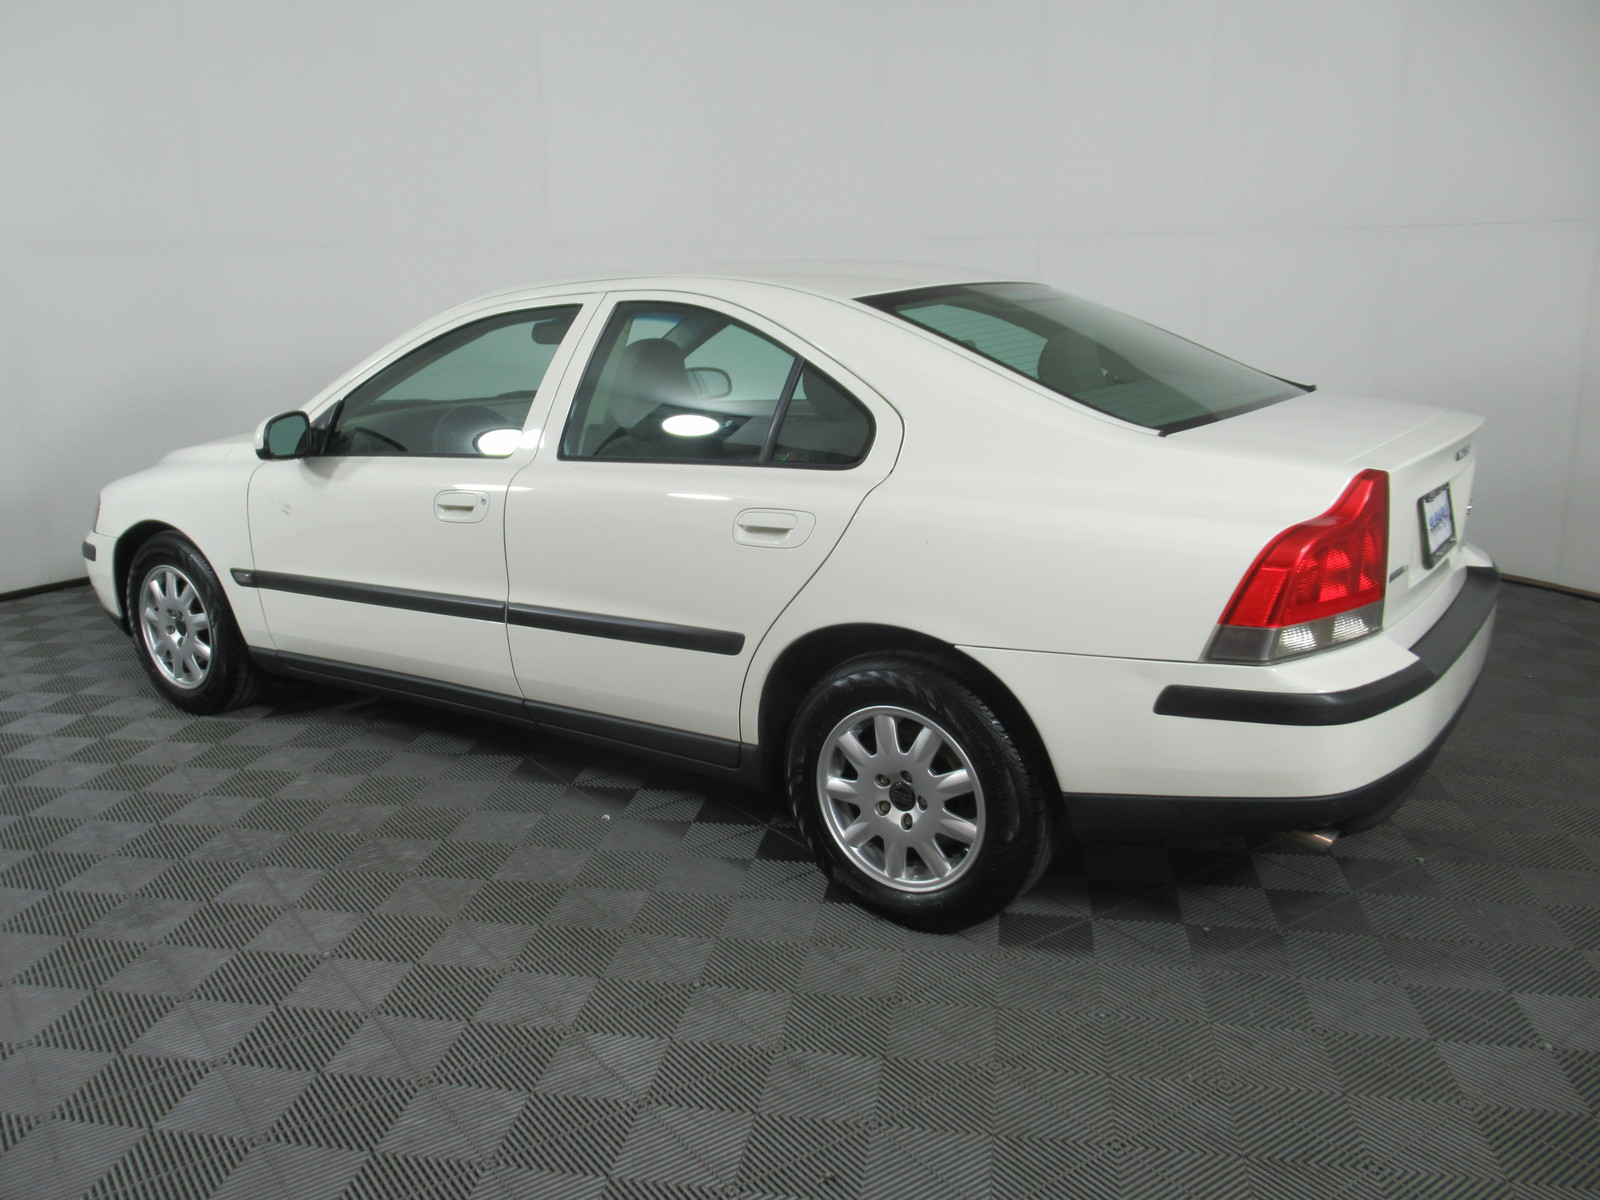 Pre-Owned 2002 Volvo S60 2.4 M 4dr Sdn Manual 4dr Car in Savoy #S20076A